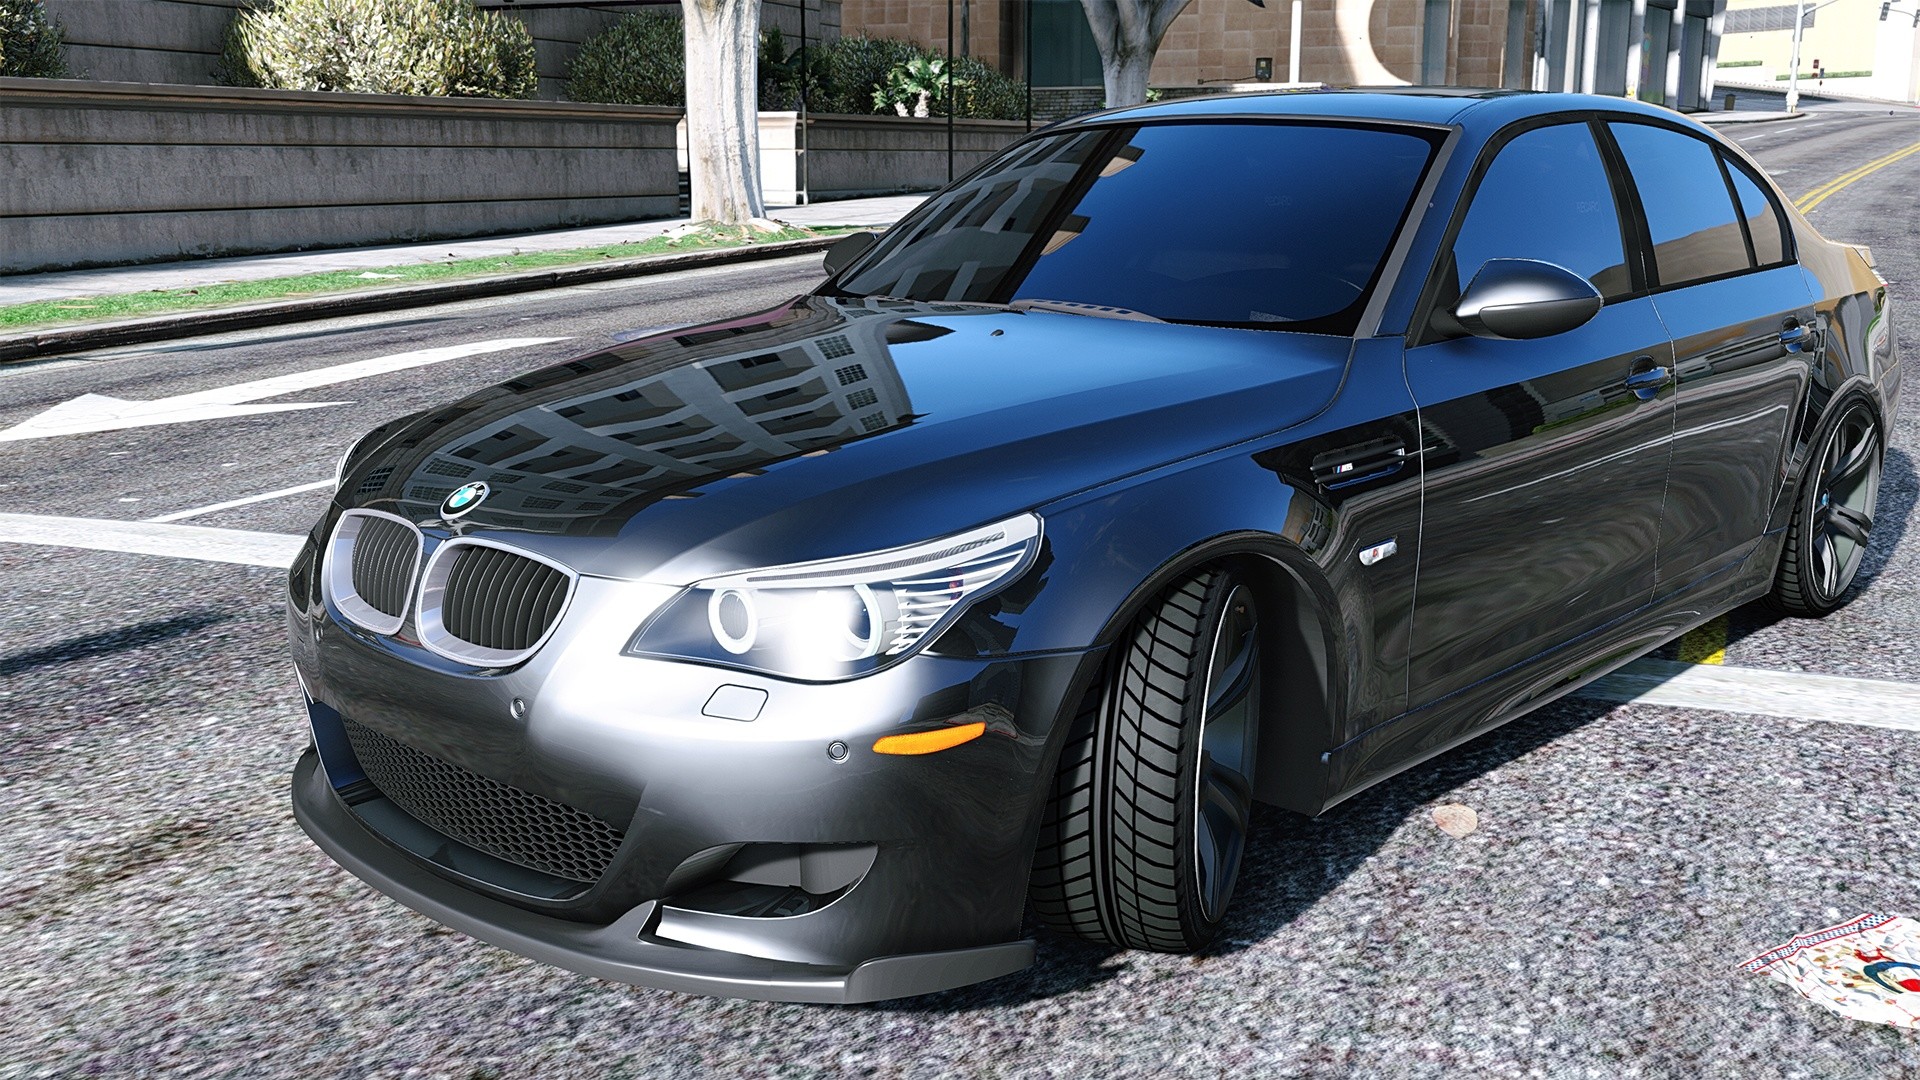 1920x1080  > BMW M5 Wallpapers